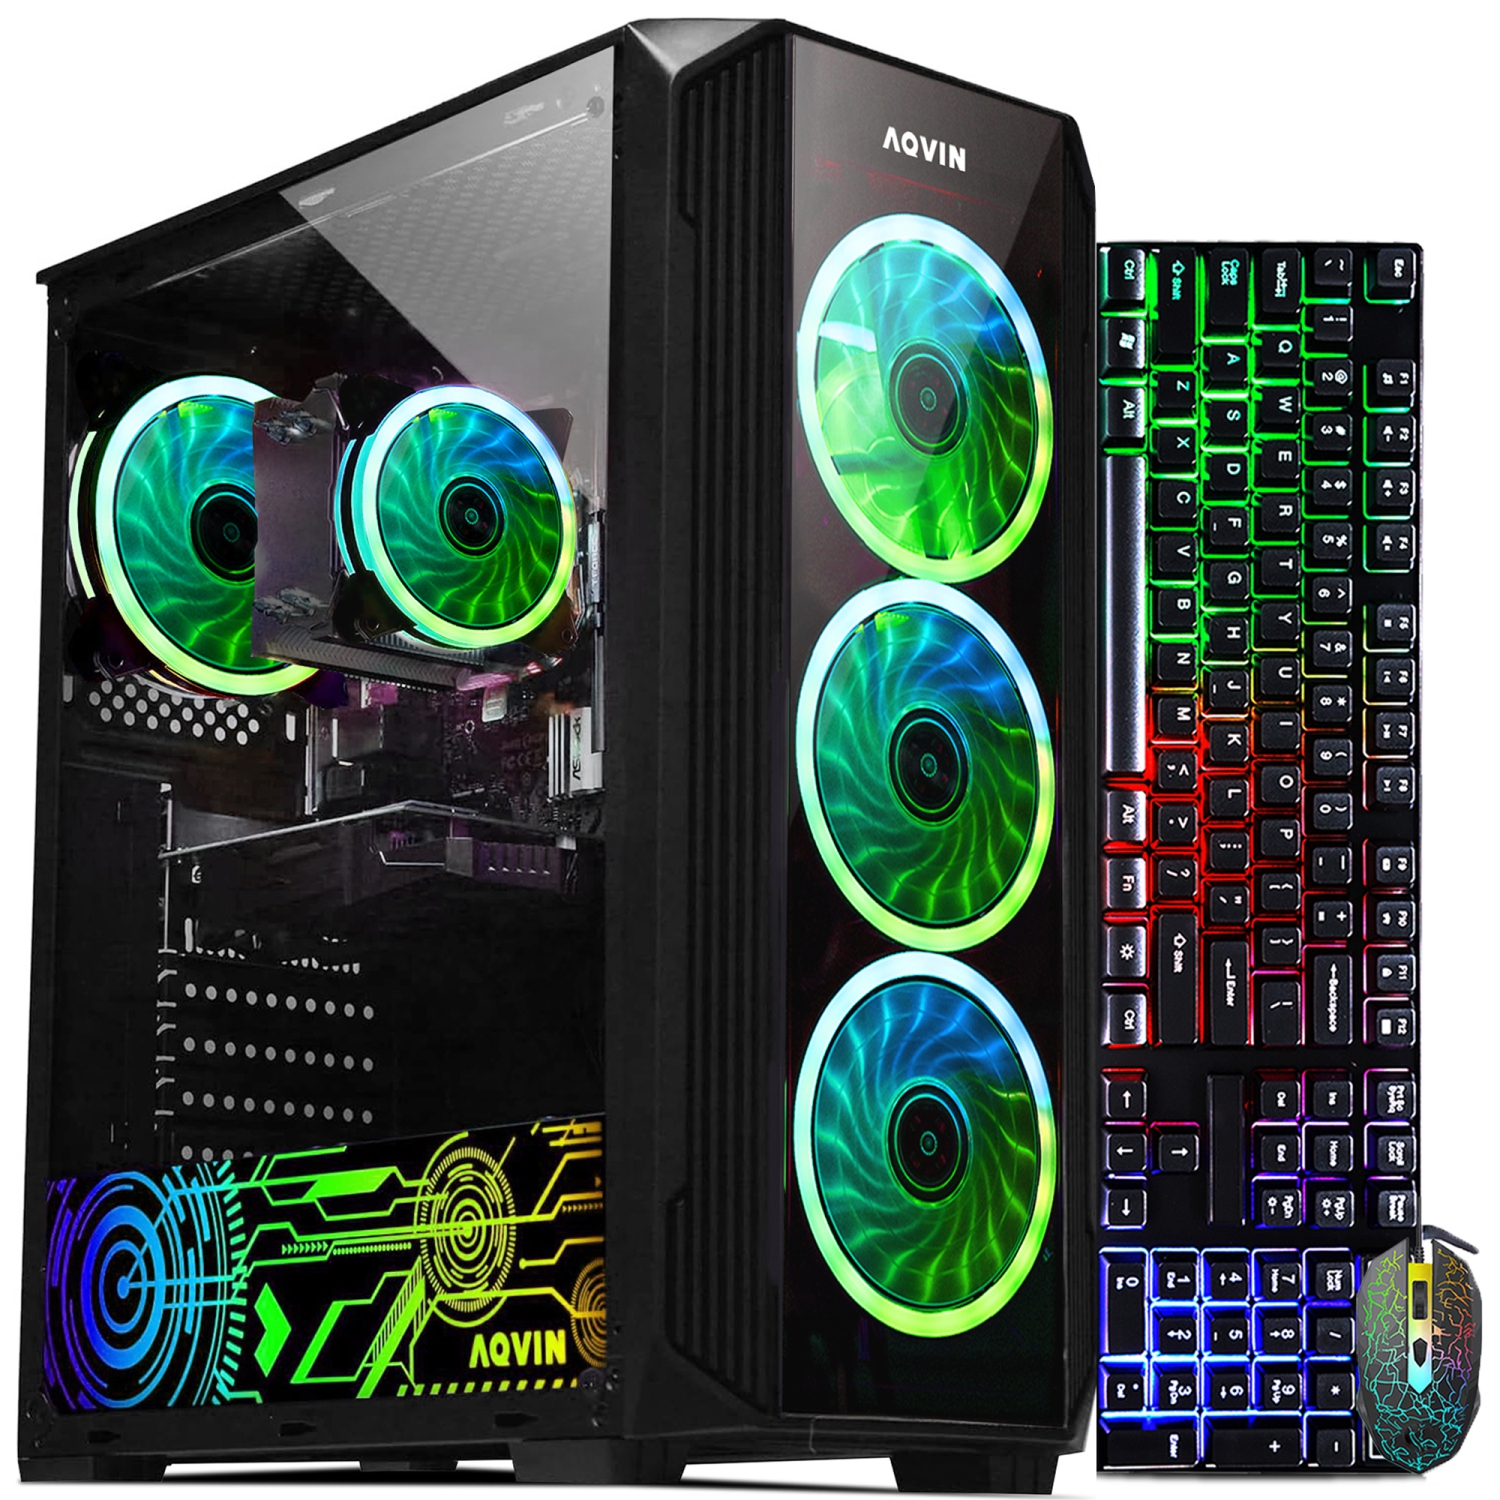 Gaming PC AQVIN ZForce Tower Desktop - GeForce GTX 1660 Super 6GB - Intel Core i7 up to 4.0Ghz 32GB DDR4 RAM 1TB SSD(fast boot) + 2TB HDD RGB Gaming Keyboard Mouse Windows 10 Wifi